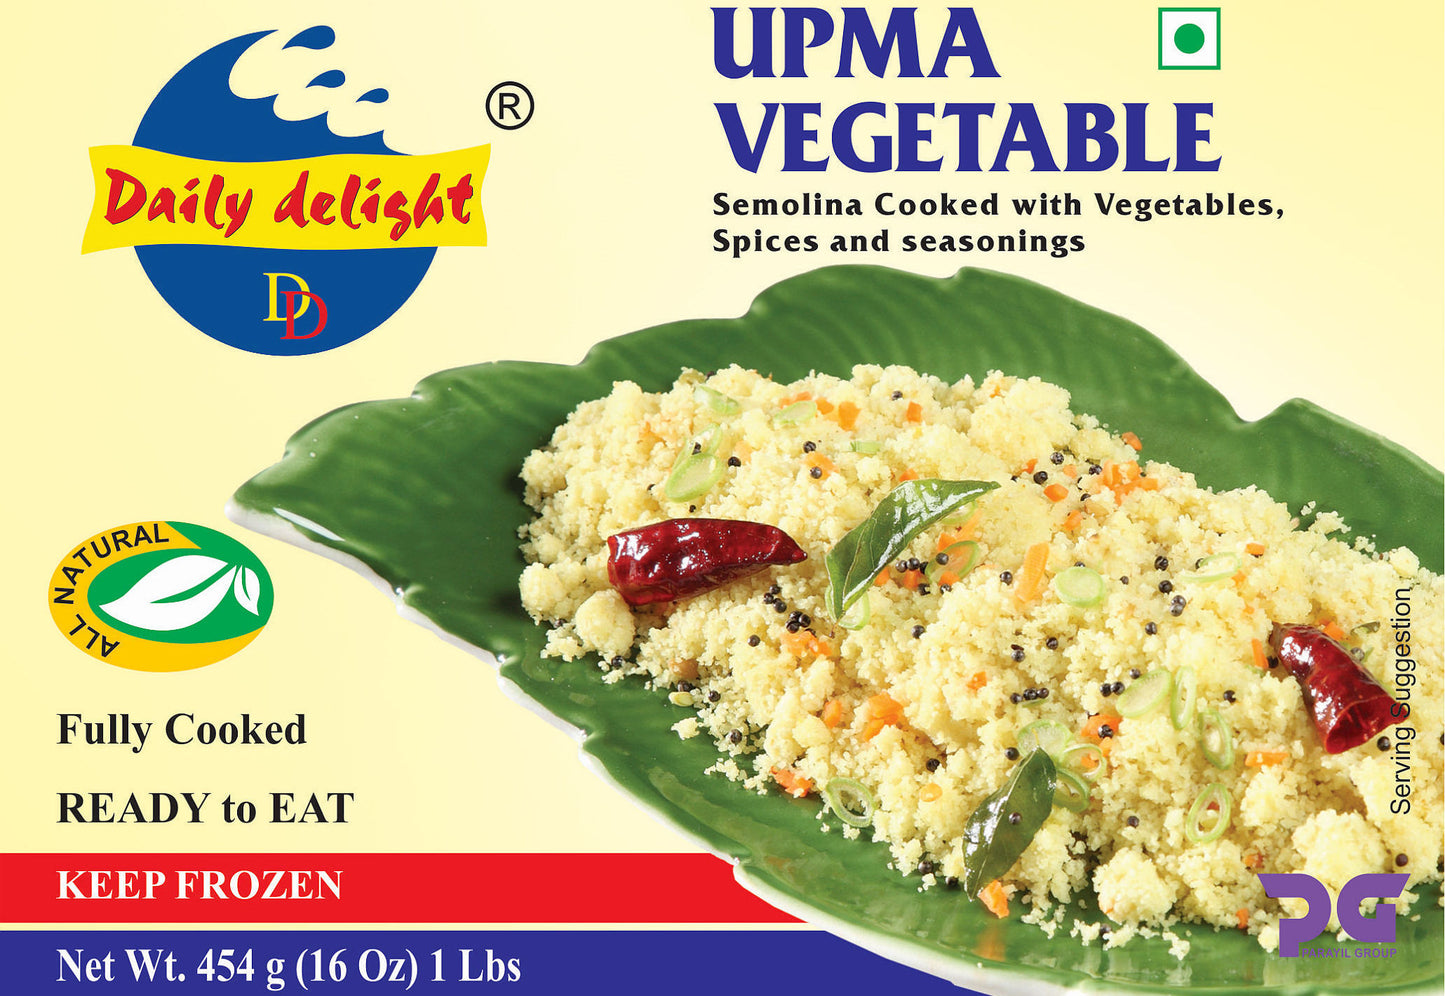 Frozen Daily Delight Vegetable Upma 454gm - Only Berlin same day delivery